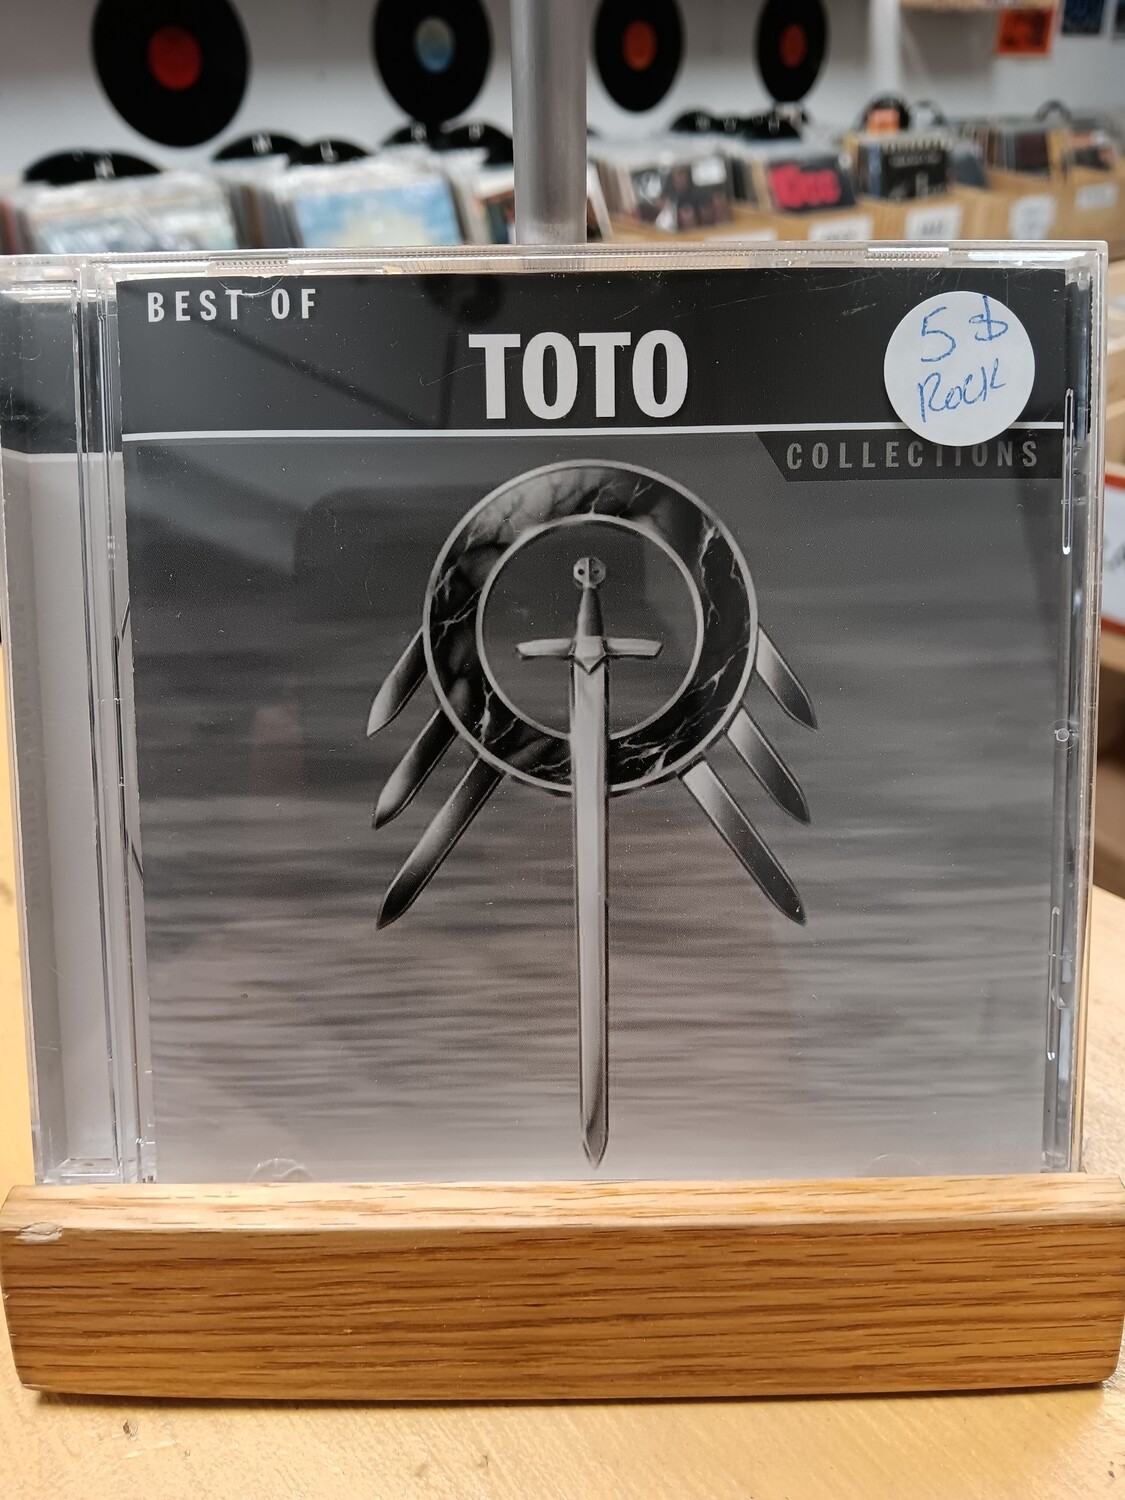 Toto - Best of Toto (CD)